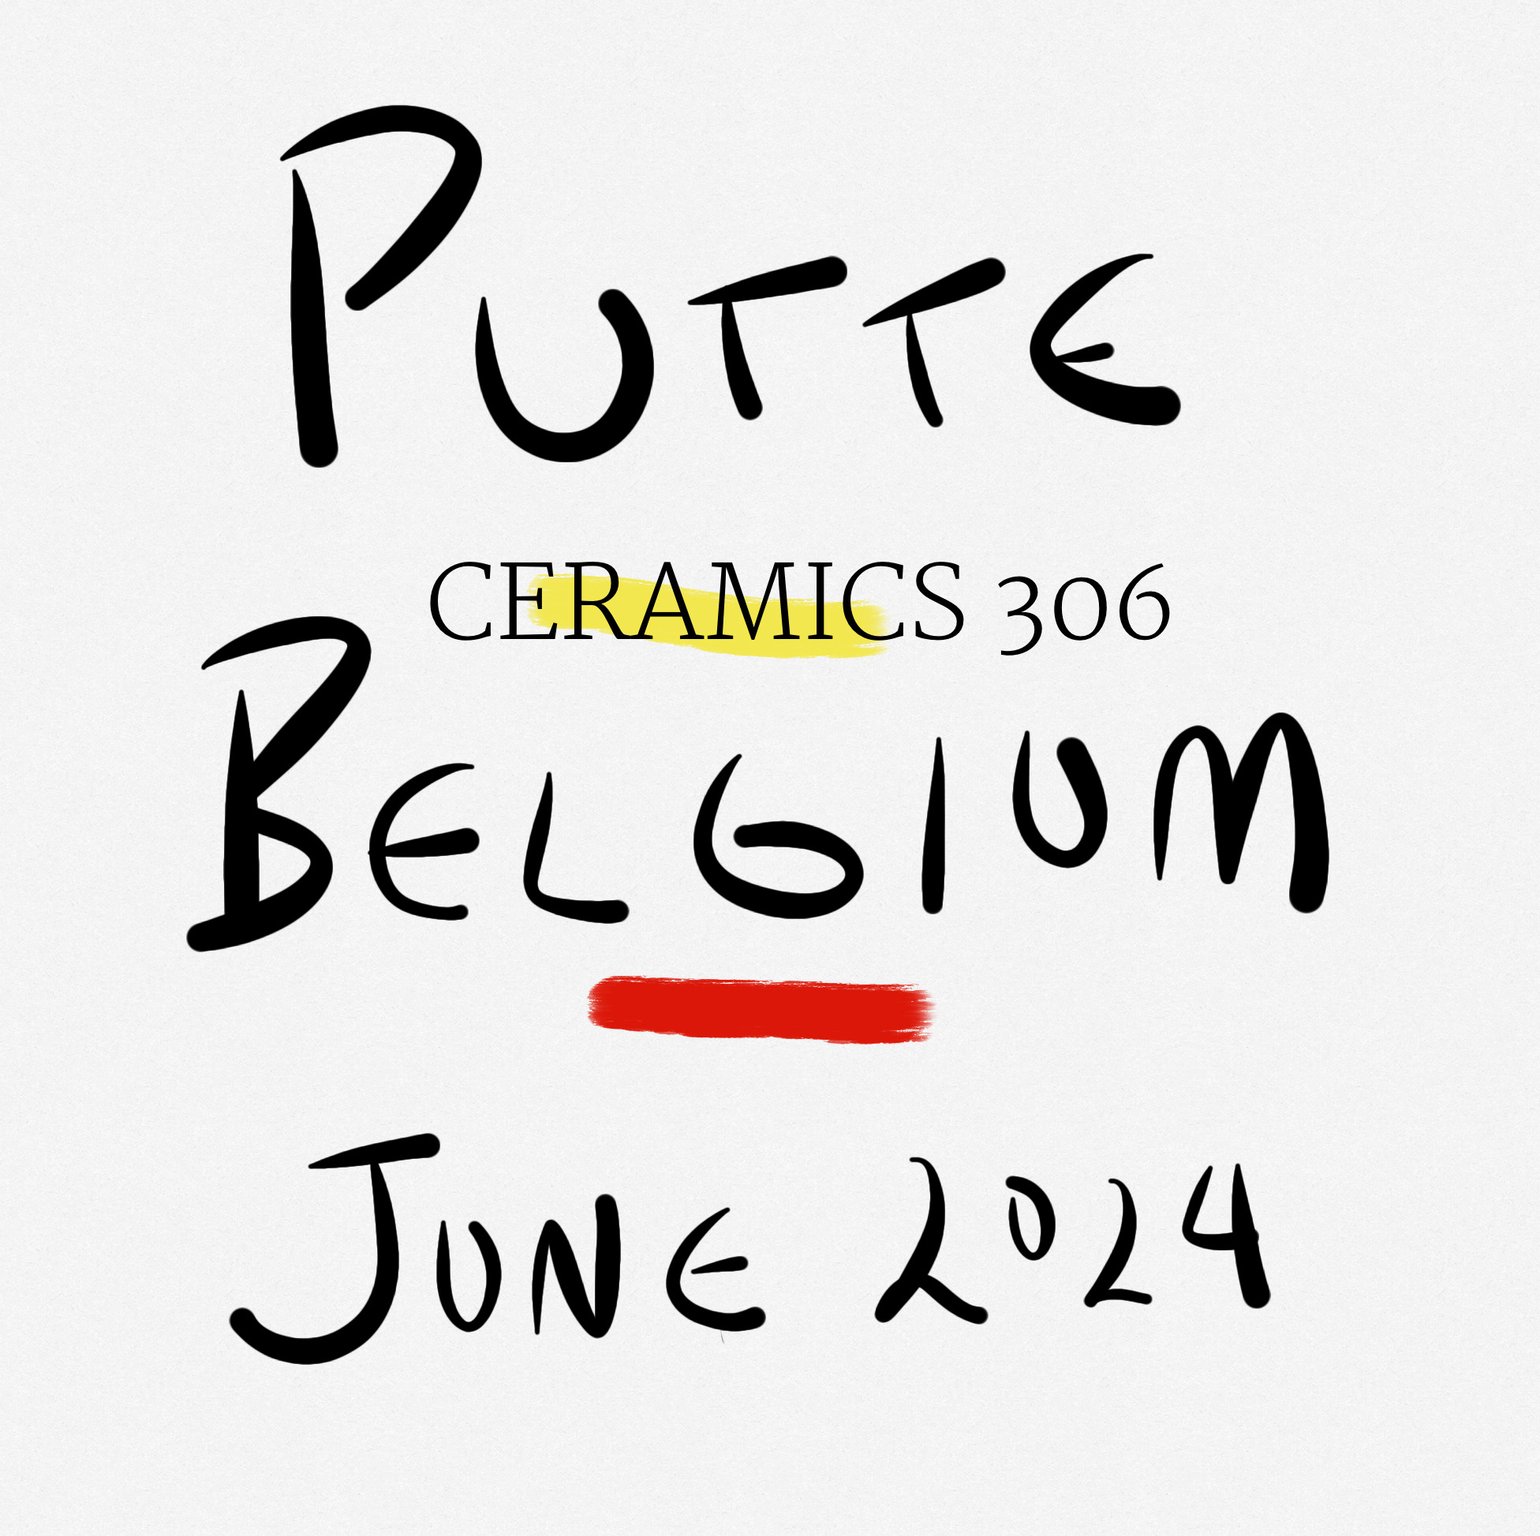 Image of BELGIUM- 2 DAY TORTUS WORKSHOPS HOSTED BY CERAMICS 306